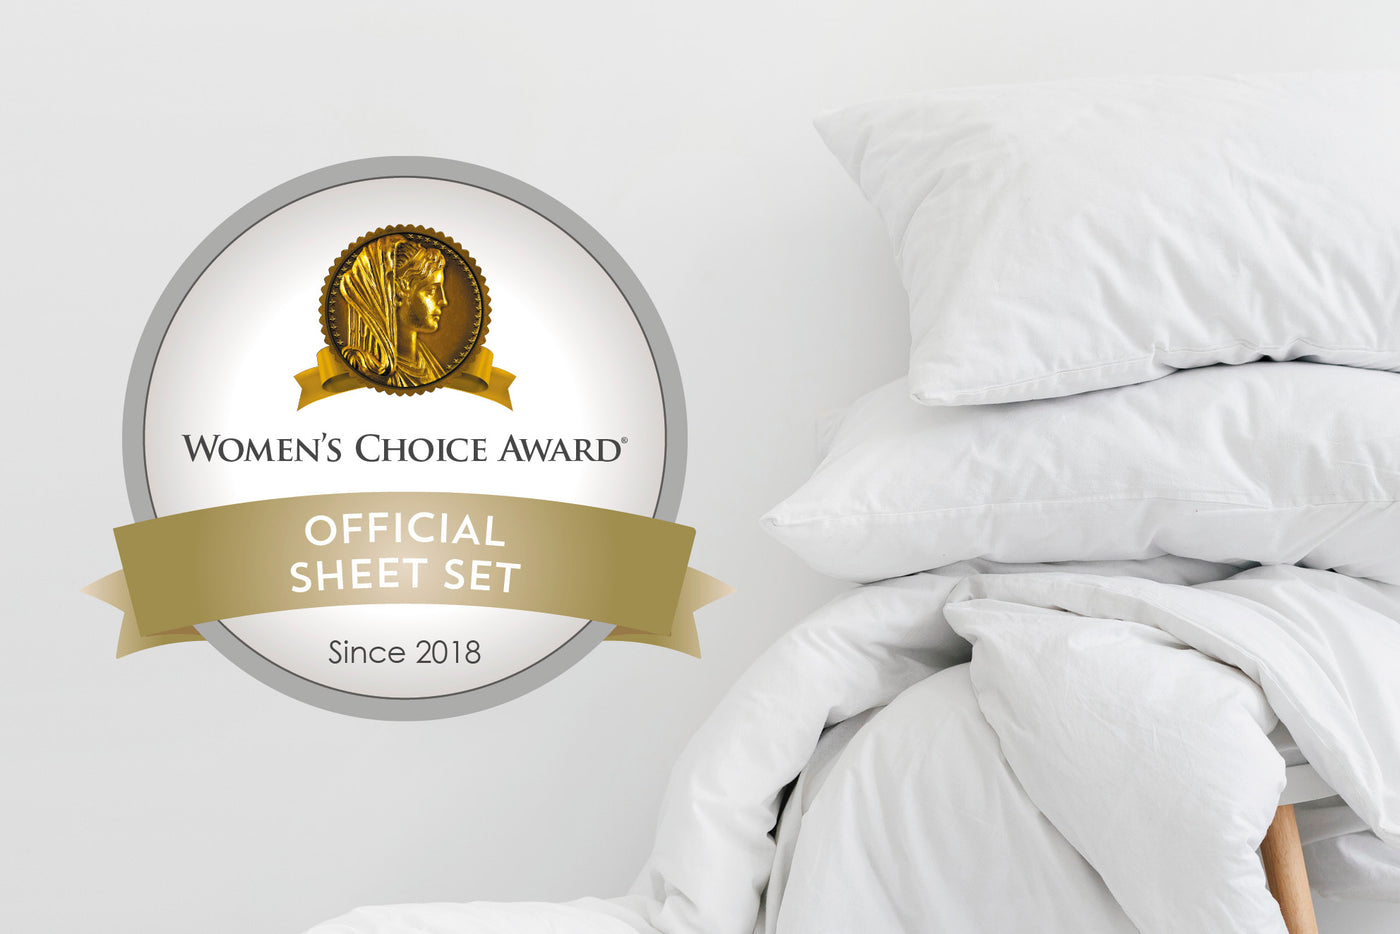 Image of a pile of white bedding on a wooden stool to the right side against a white wall with a large sticker on the left side that says: "Women's Choice Award Official Sheet Set Since 2018"